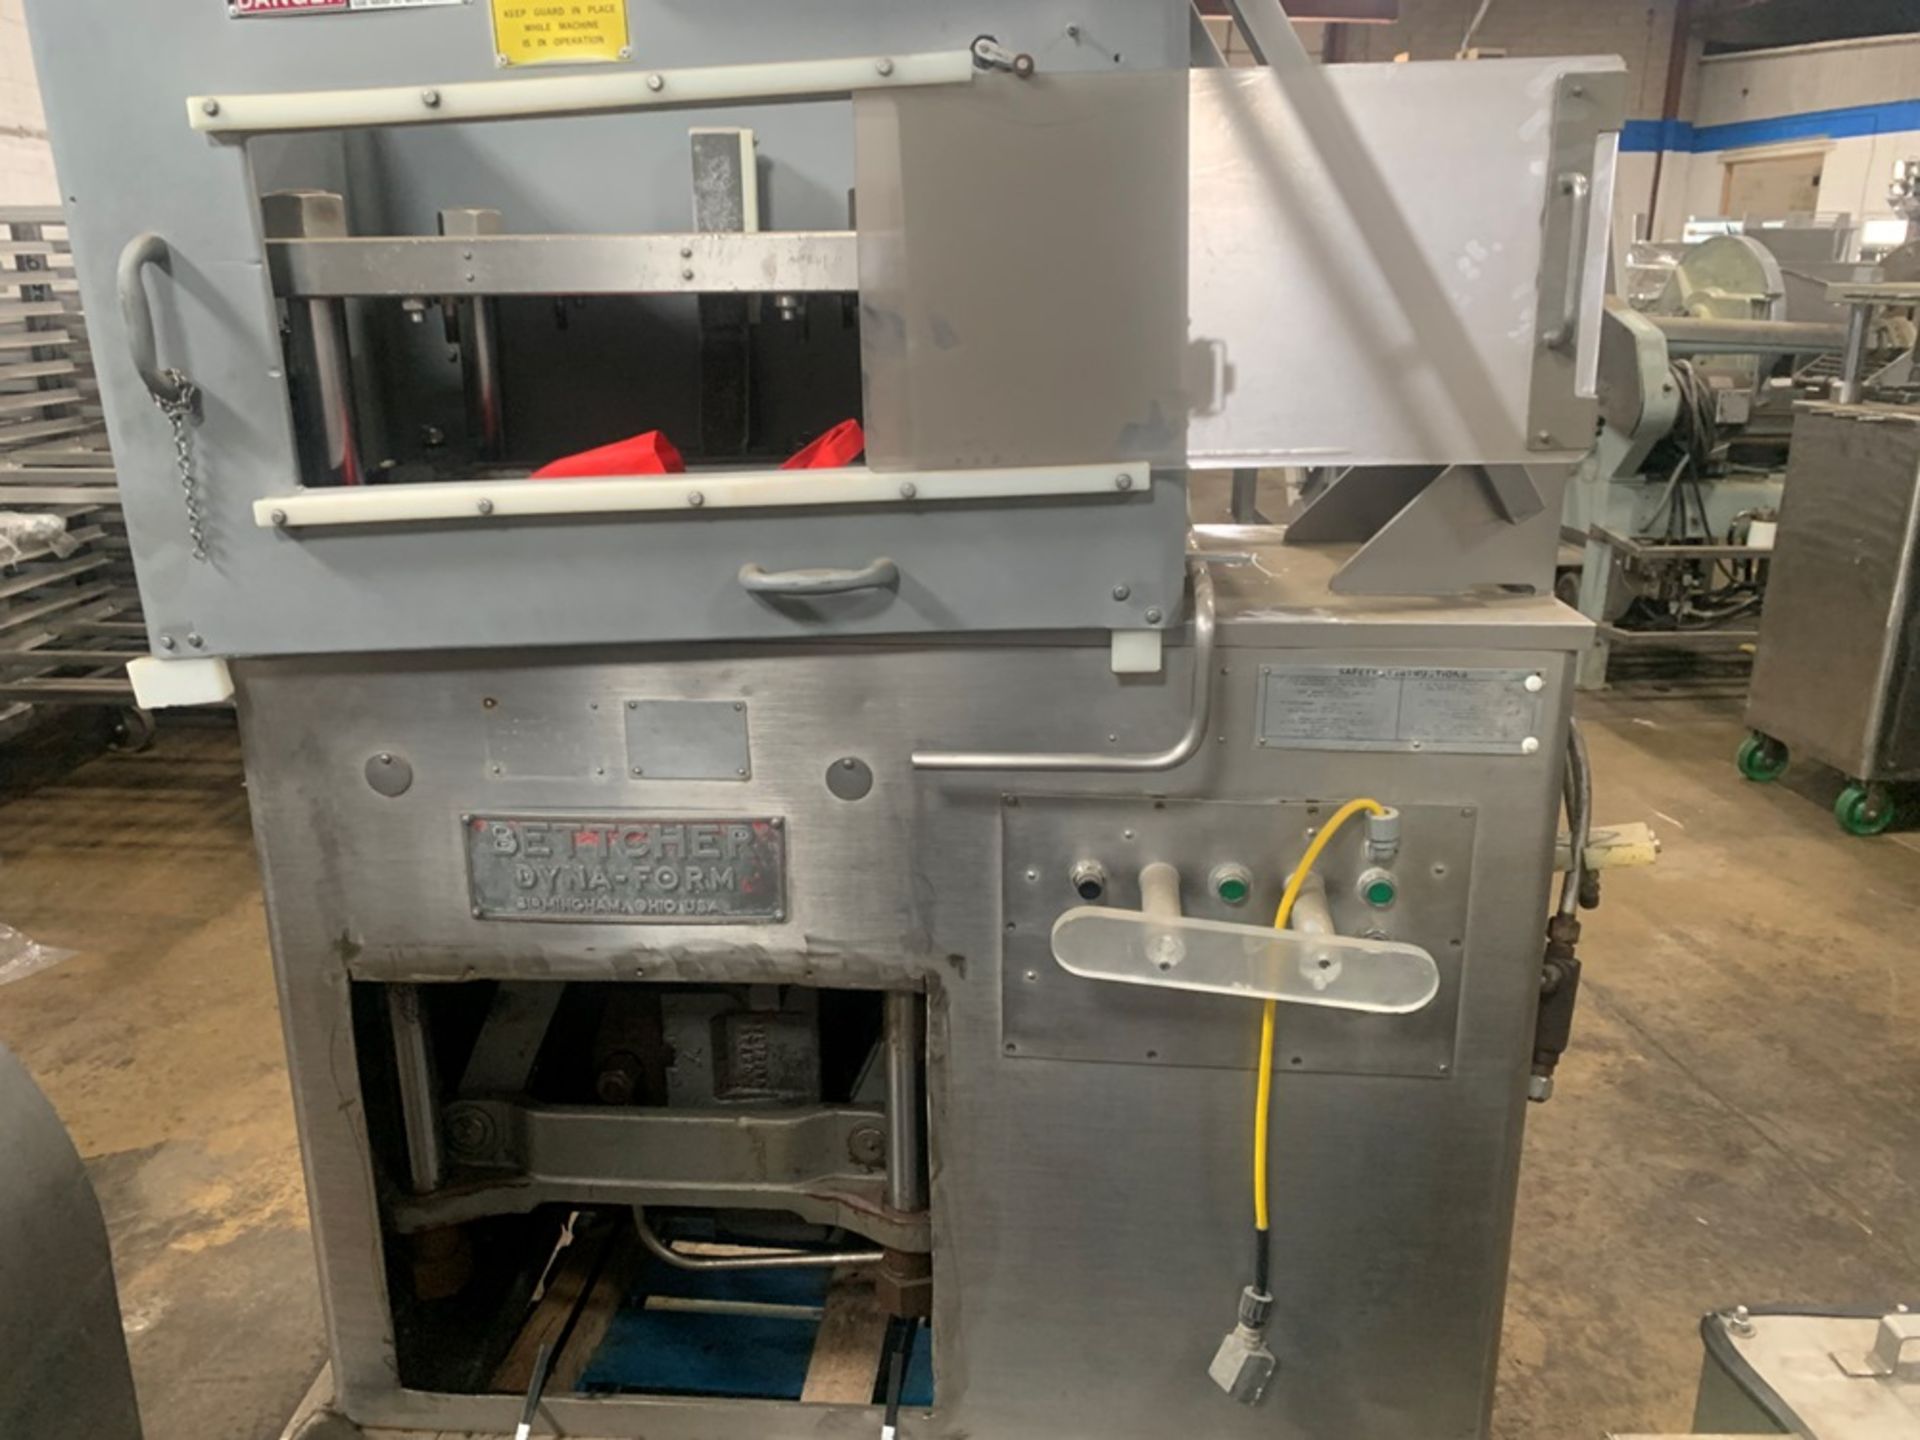 Bettcher Mdl. 75 Press with power pack for parts (Located in Plano, IL) - Image 4 of 11